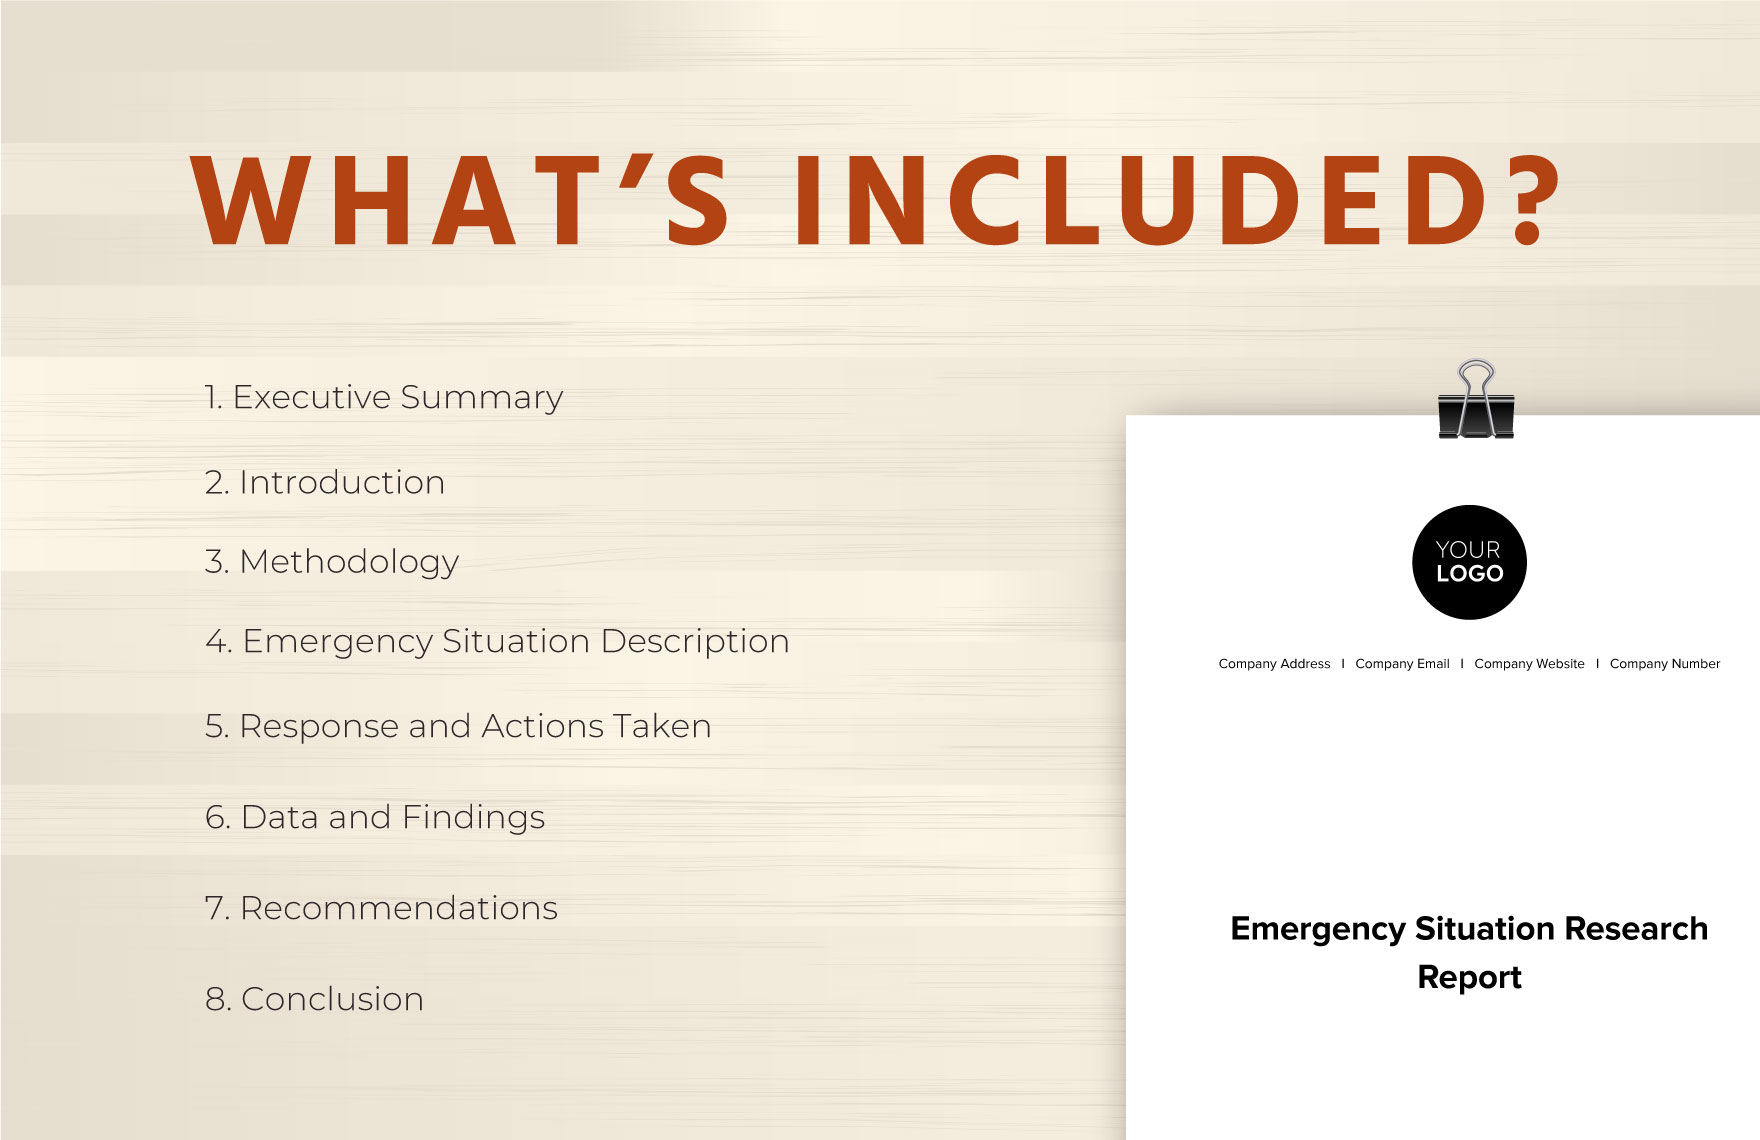 Emergency Situation Research Report Template